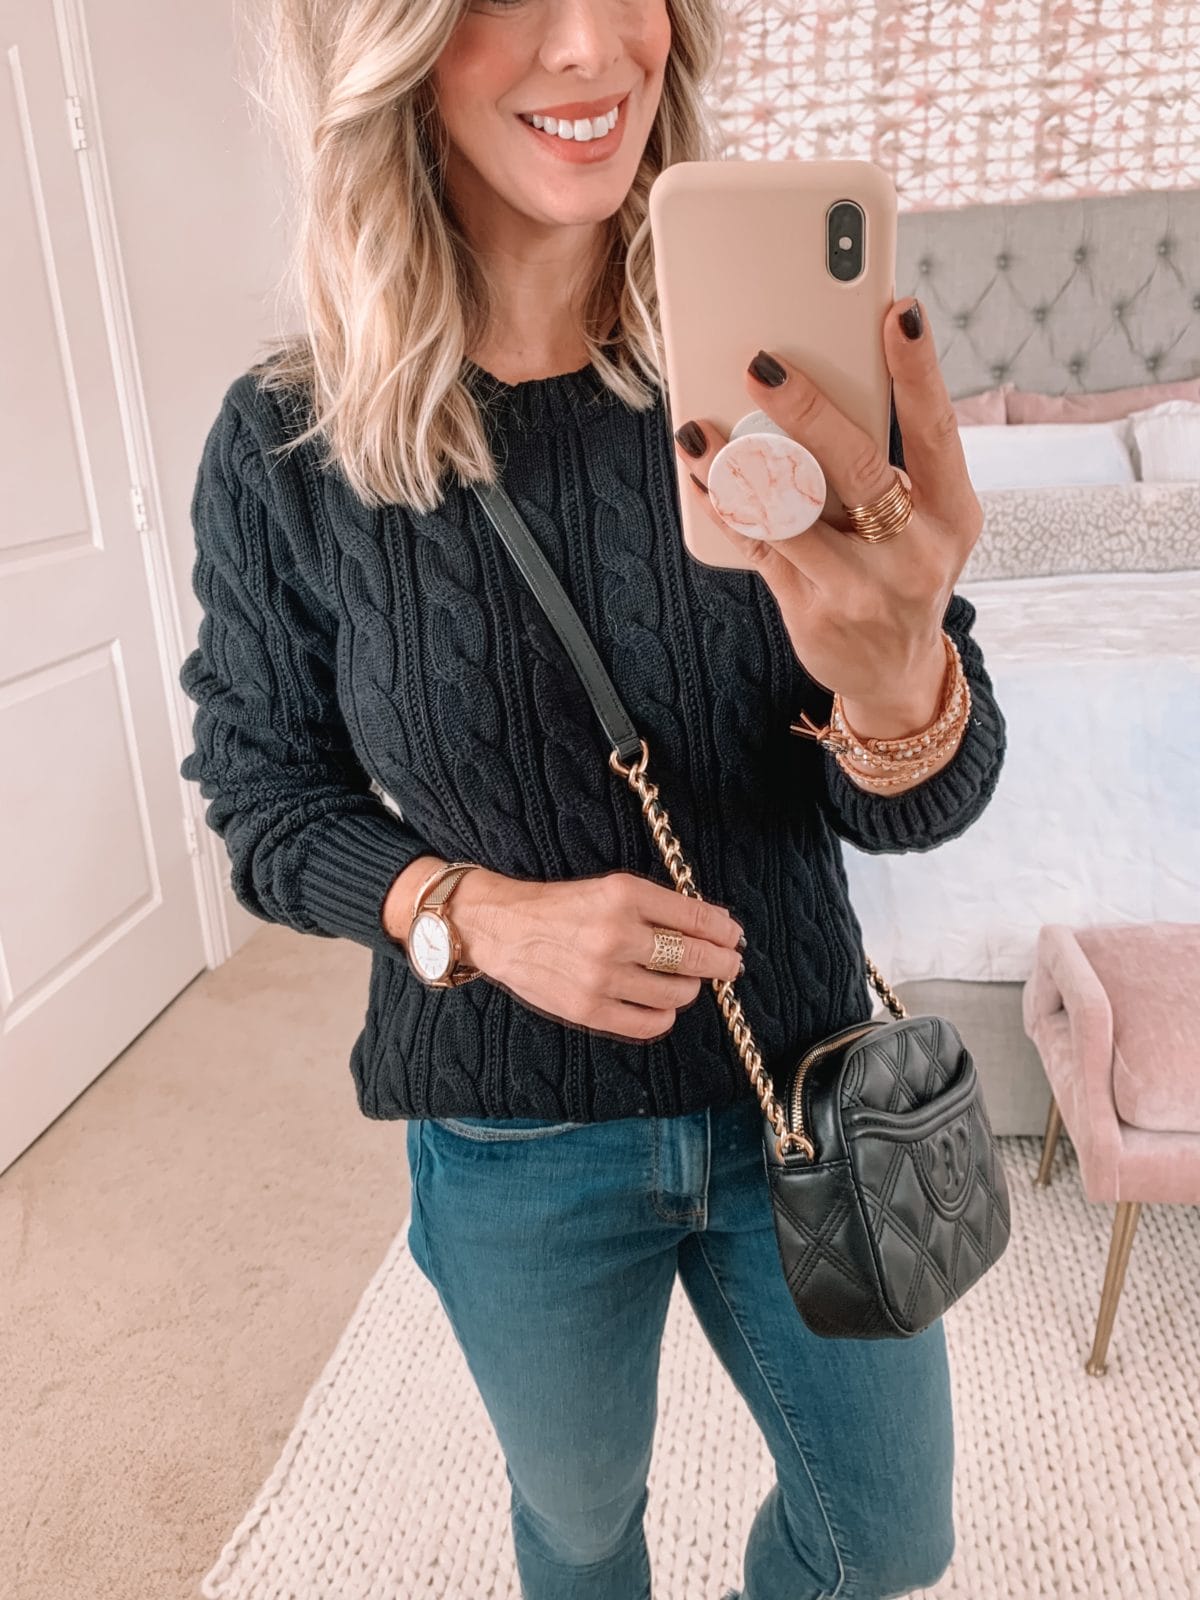 Amazon Fashion Faves, Cable Knit Sweater, Jeans, Crossbody